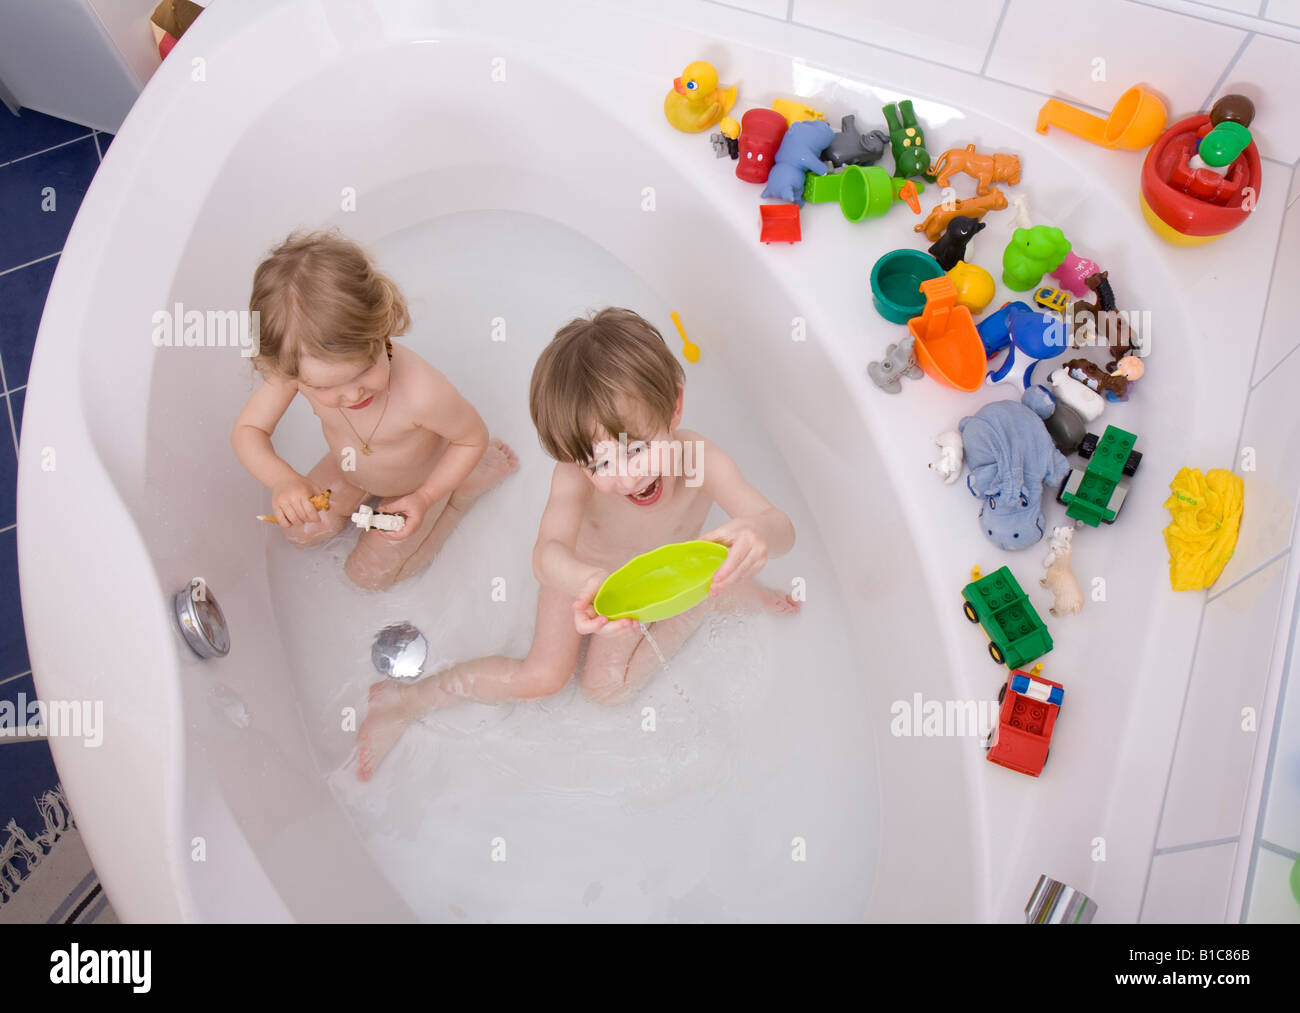 little children playing in bath tub Stock Photo